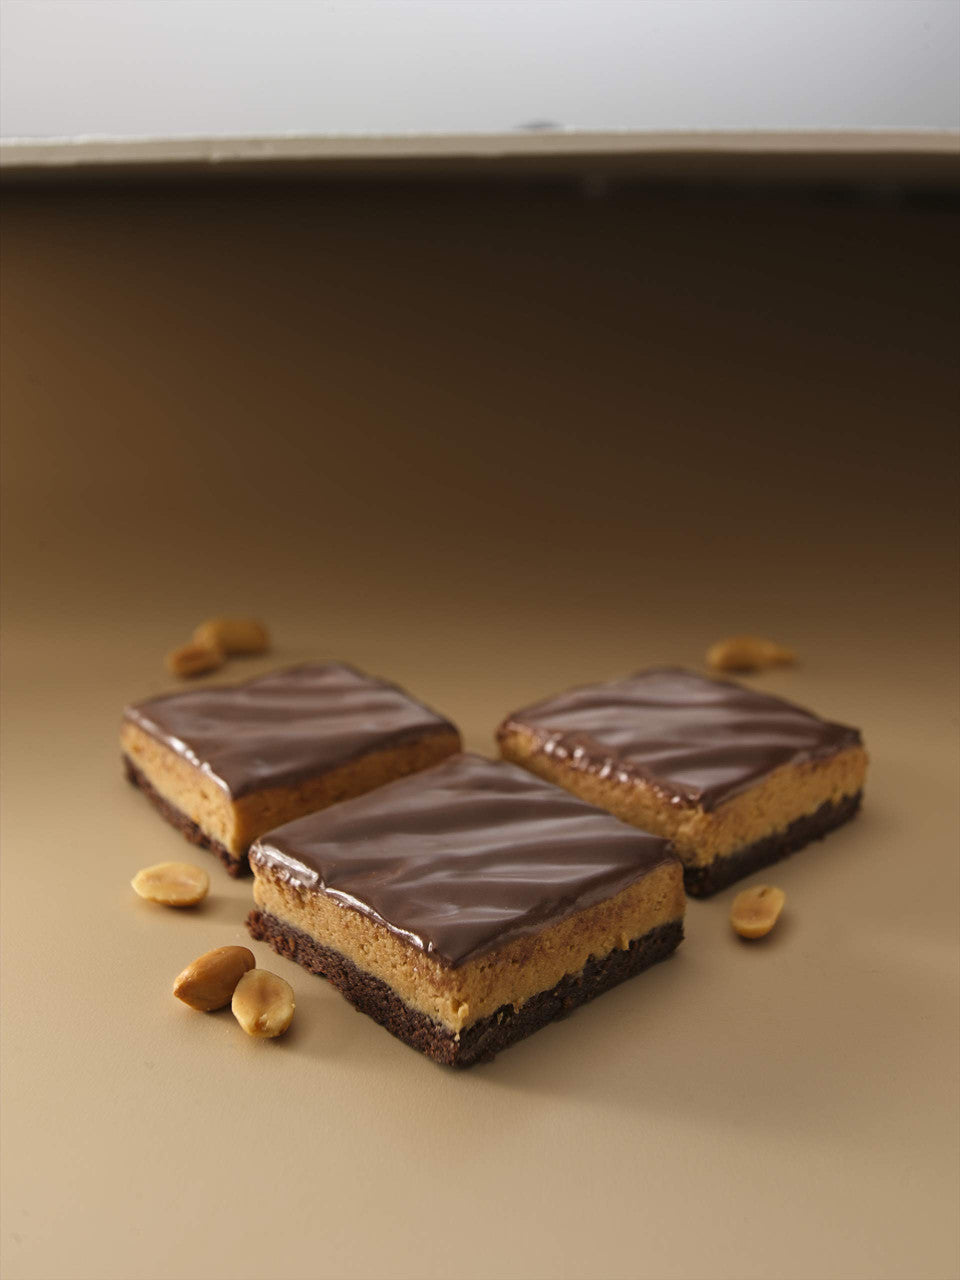 Reese Peanut Butter Filling & Chocolate Frosting Dessert Bar Kit, 503g/17.7oz. (Imported from Canada)